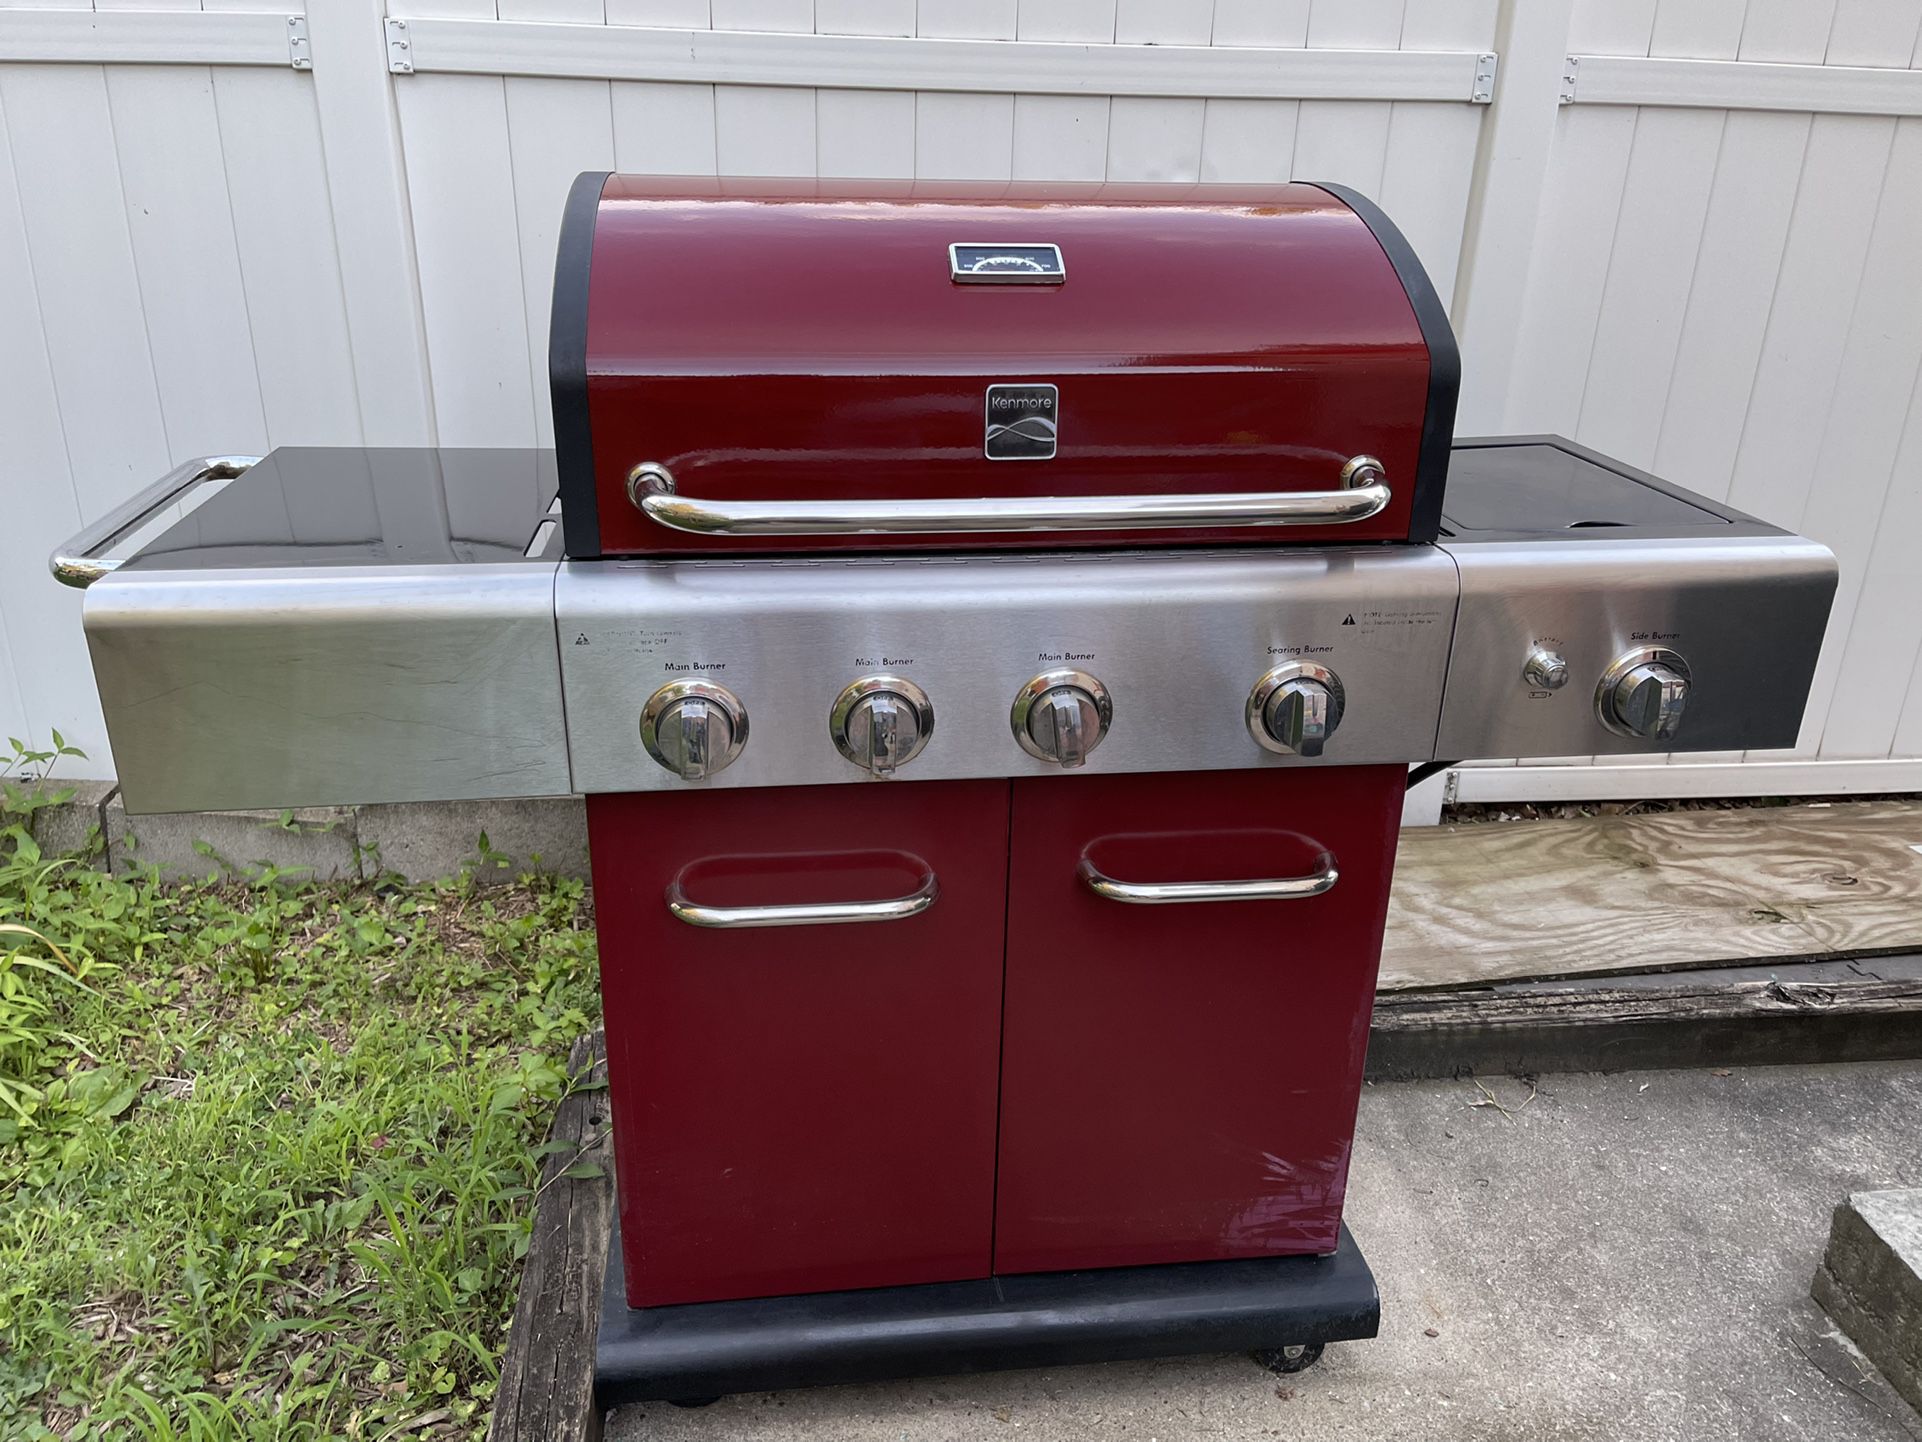 Kenmore 4-Burner Gas Grill with Side Searing Burner